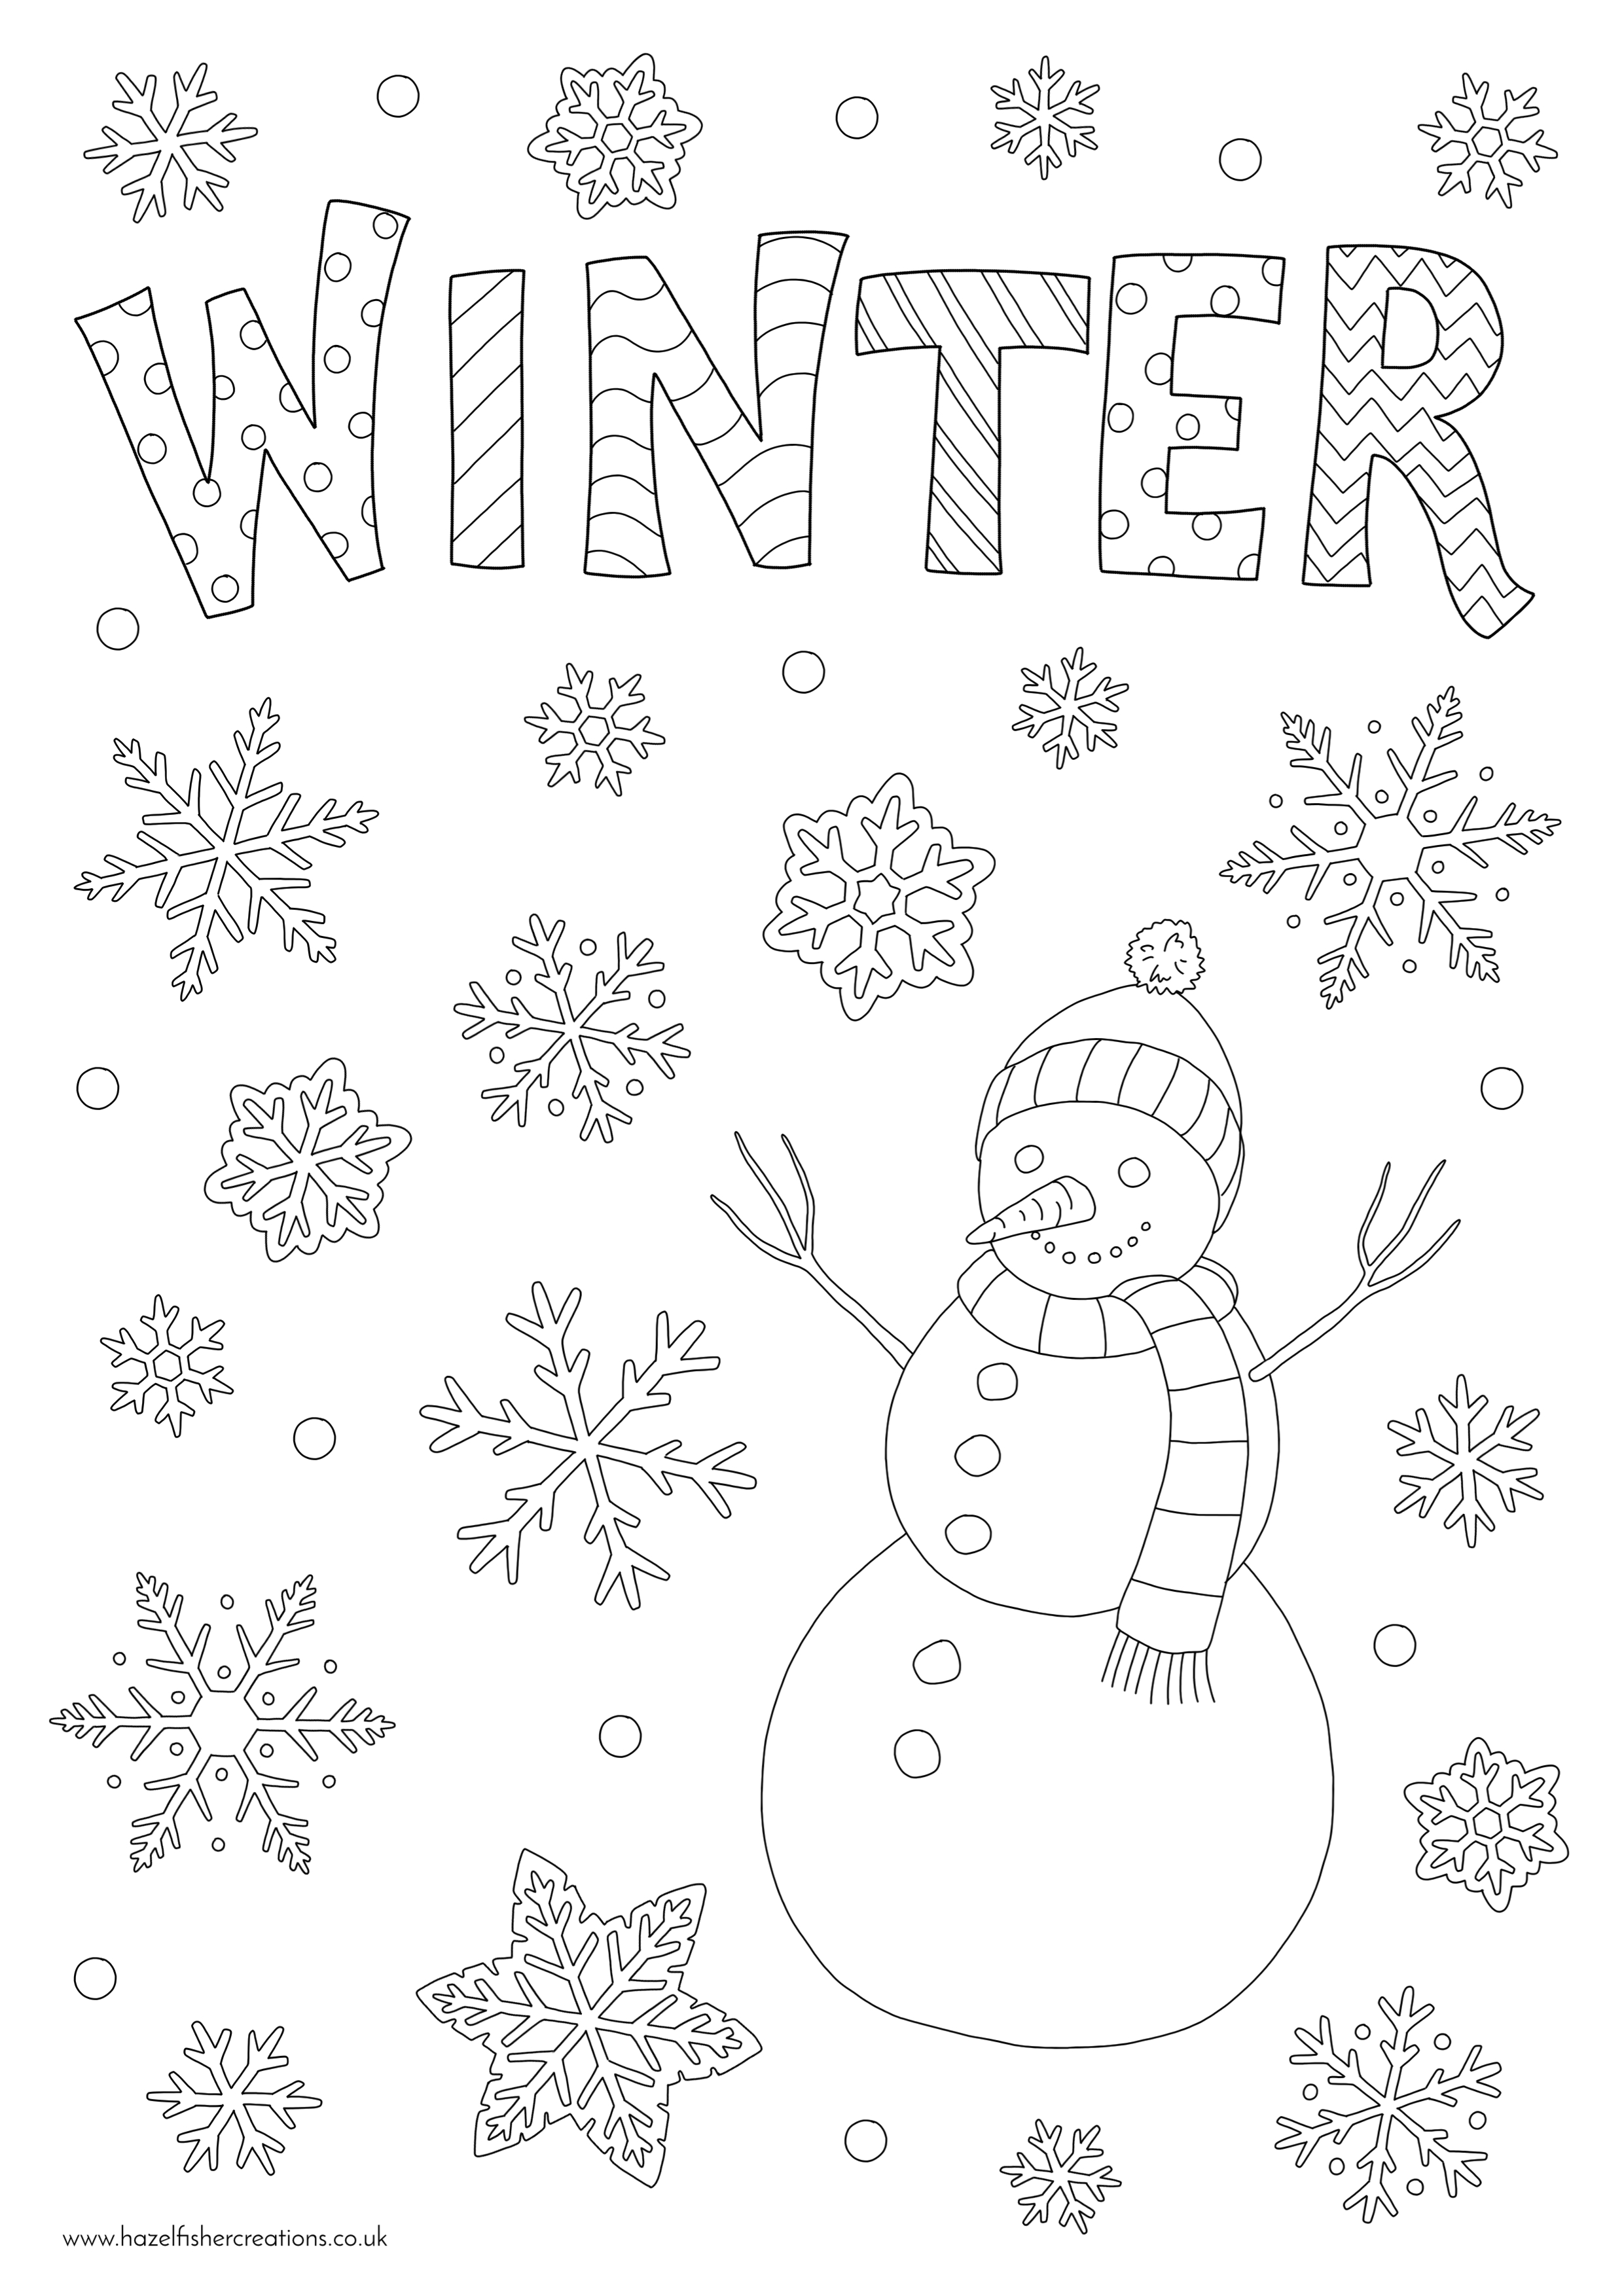 Winter Colouring In Activity Sheet  image